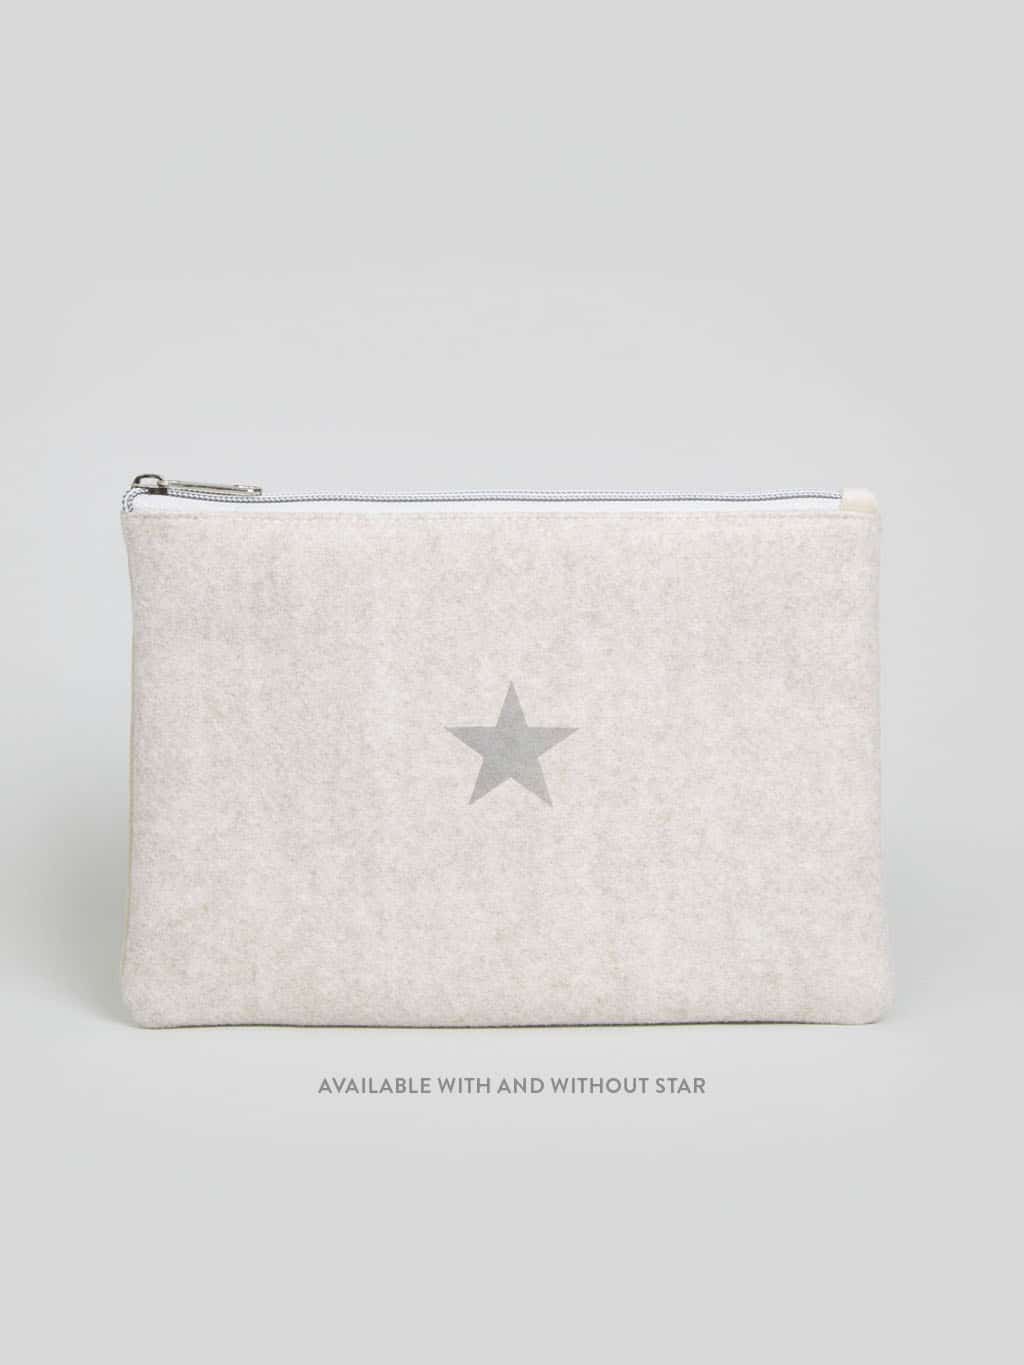 oatmeal bag with a star and text which says available with and without a star